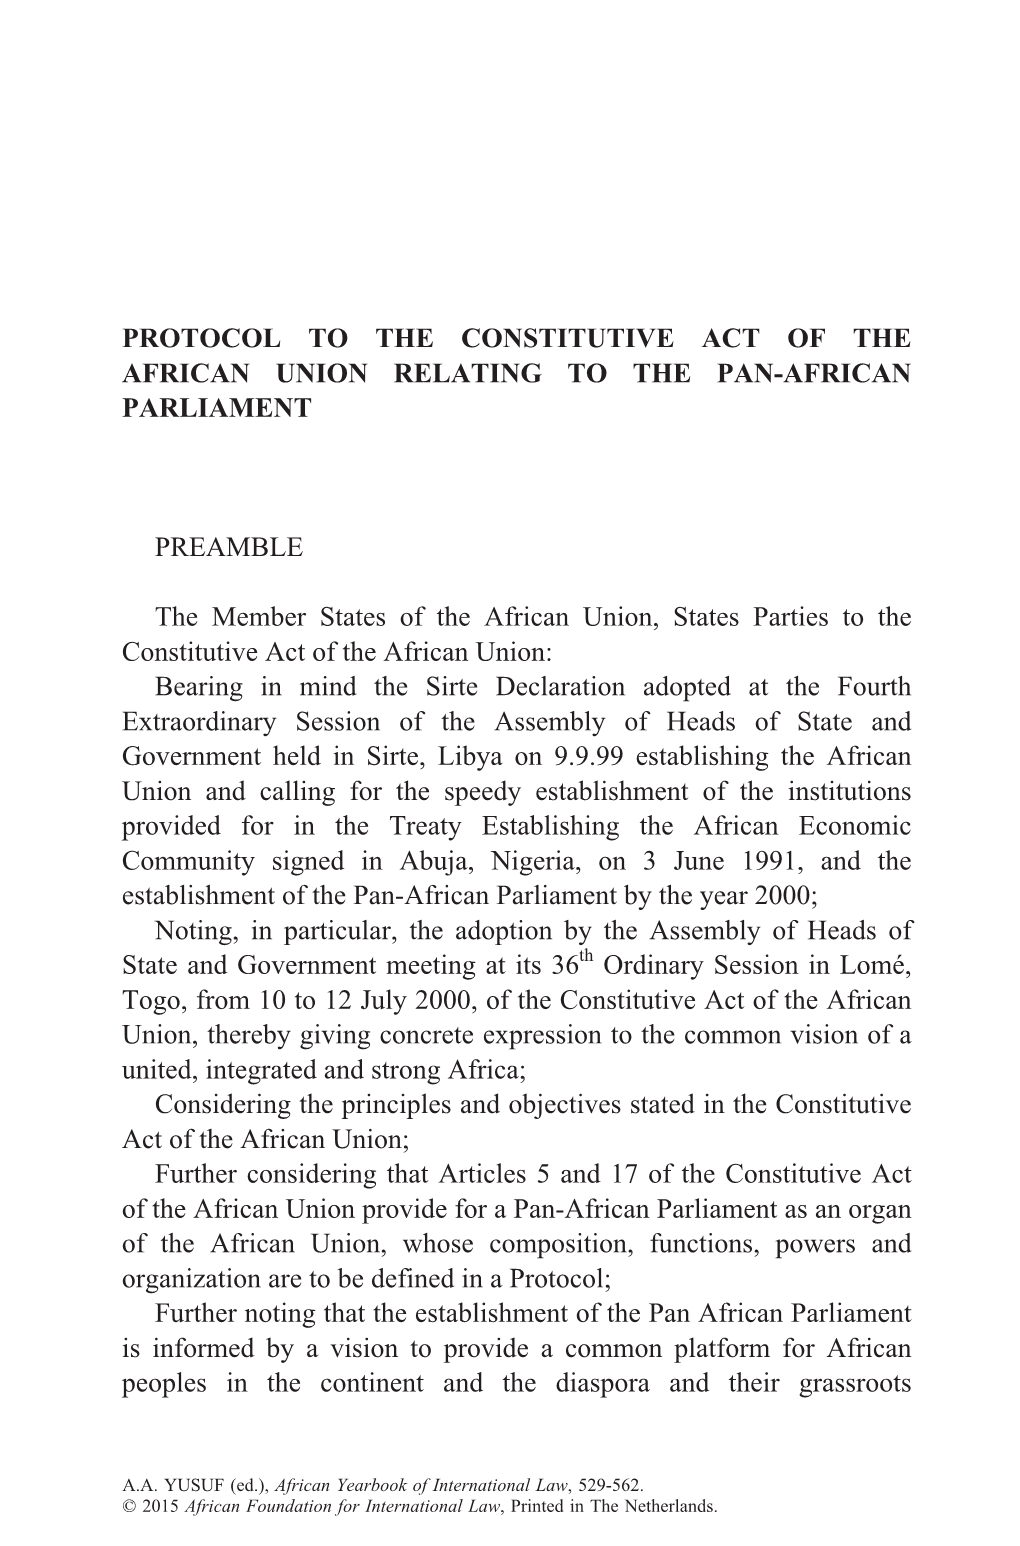 Protocol to the Constitutive Act of the African Union Relating to the Pan-African Parliament